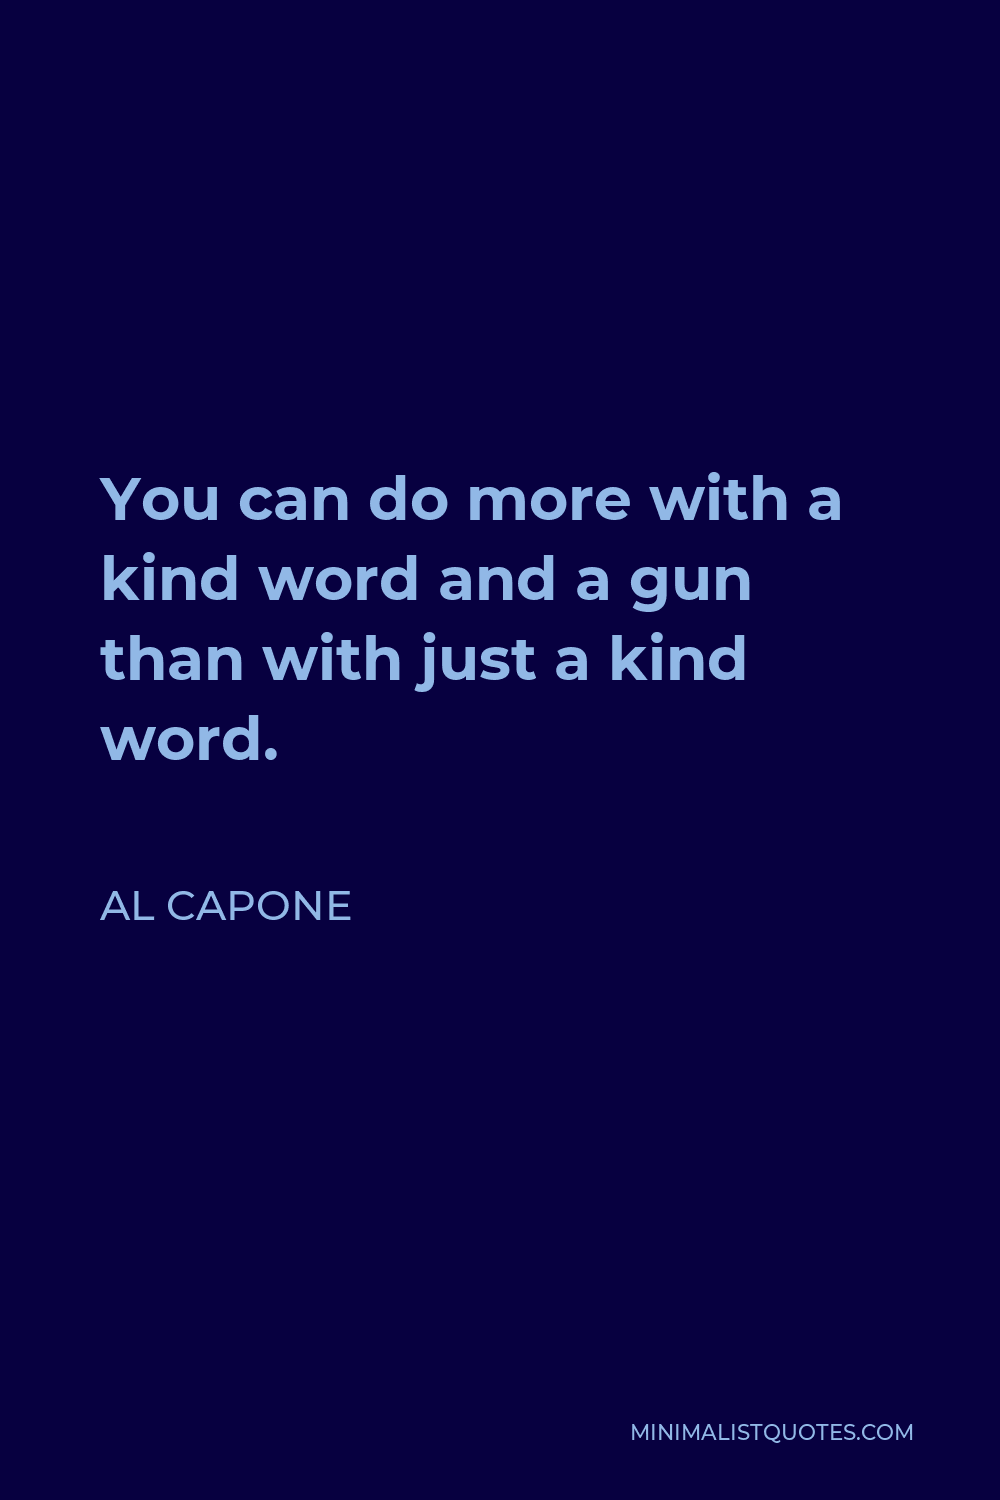 Al Capone Quote - You can do more with a kind word and a gun than with just a kind word.